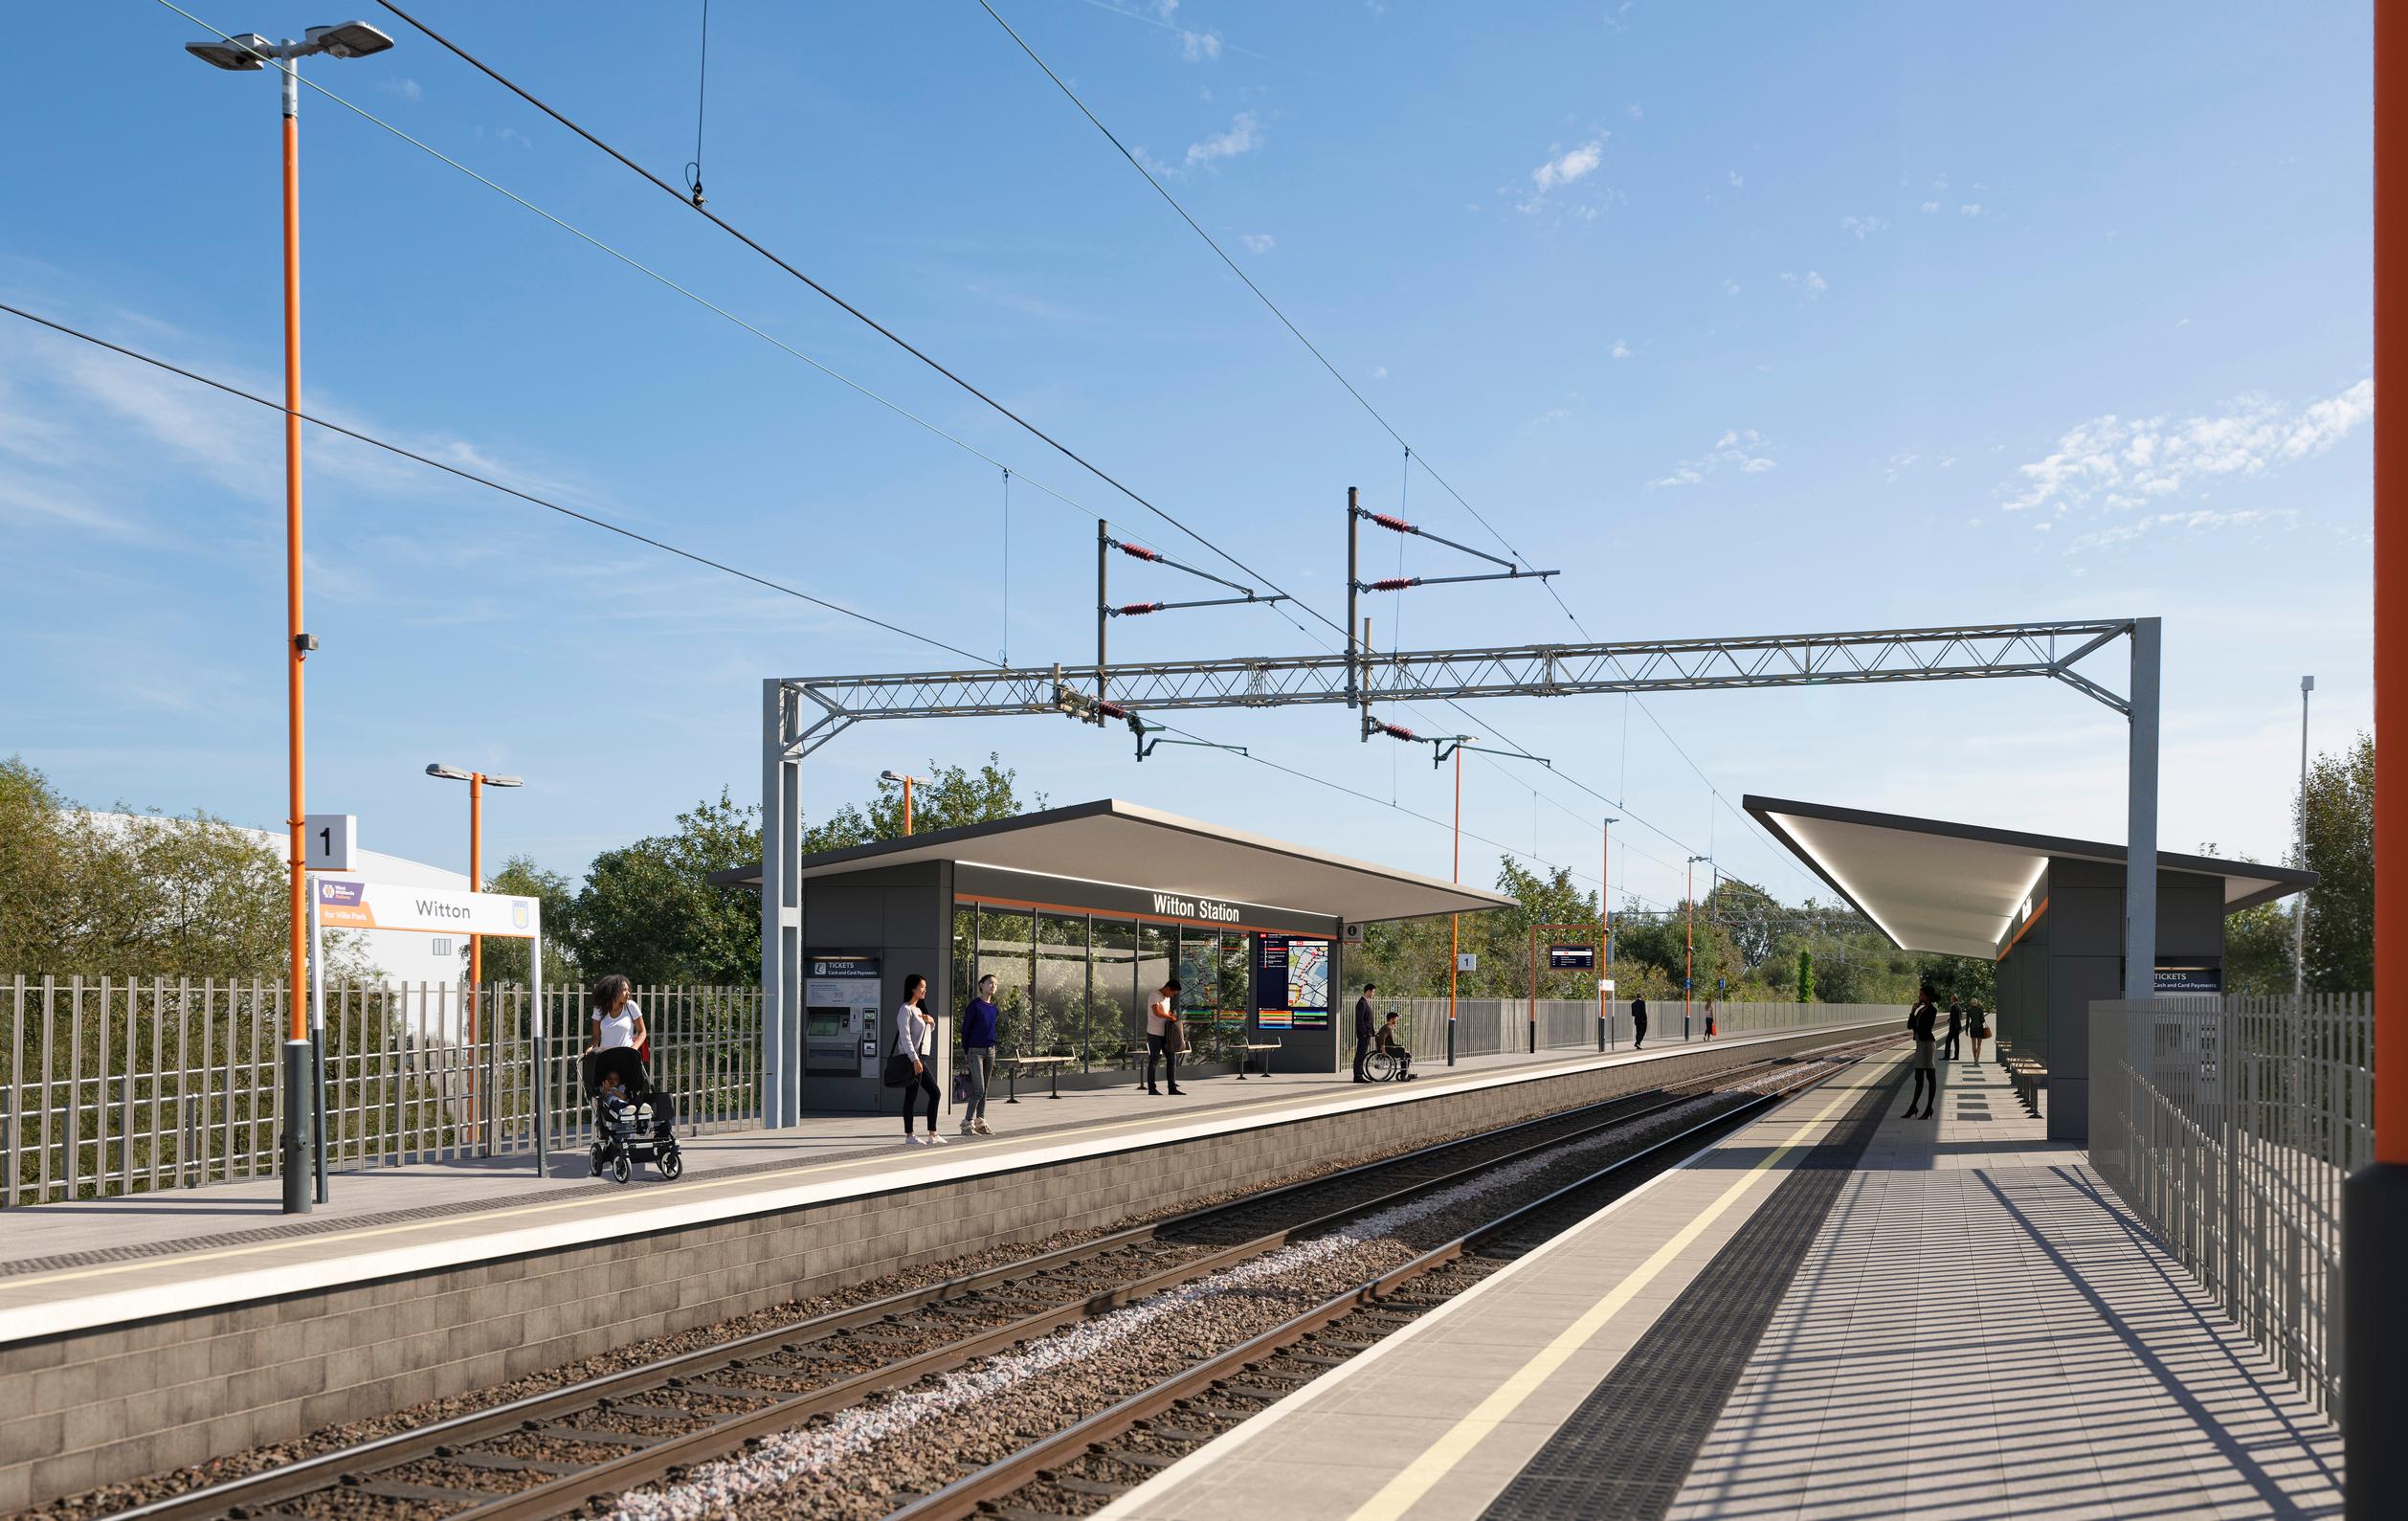 Designs for the new platform at Witton station